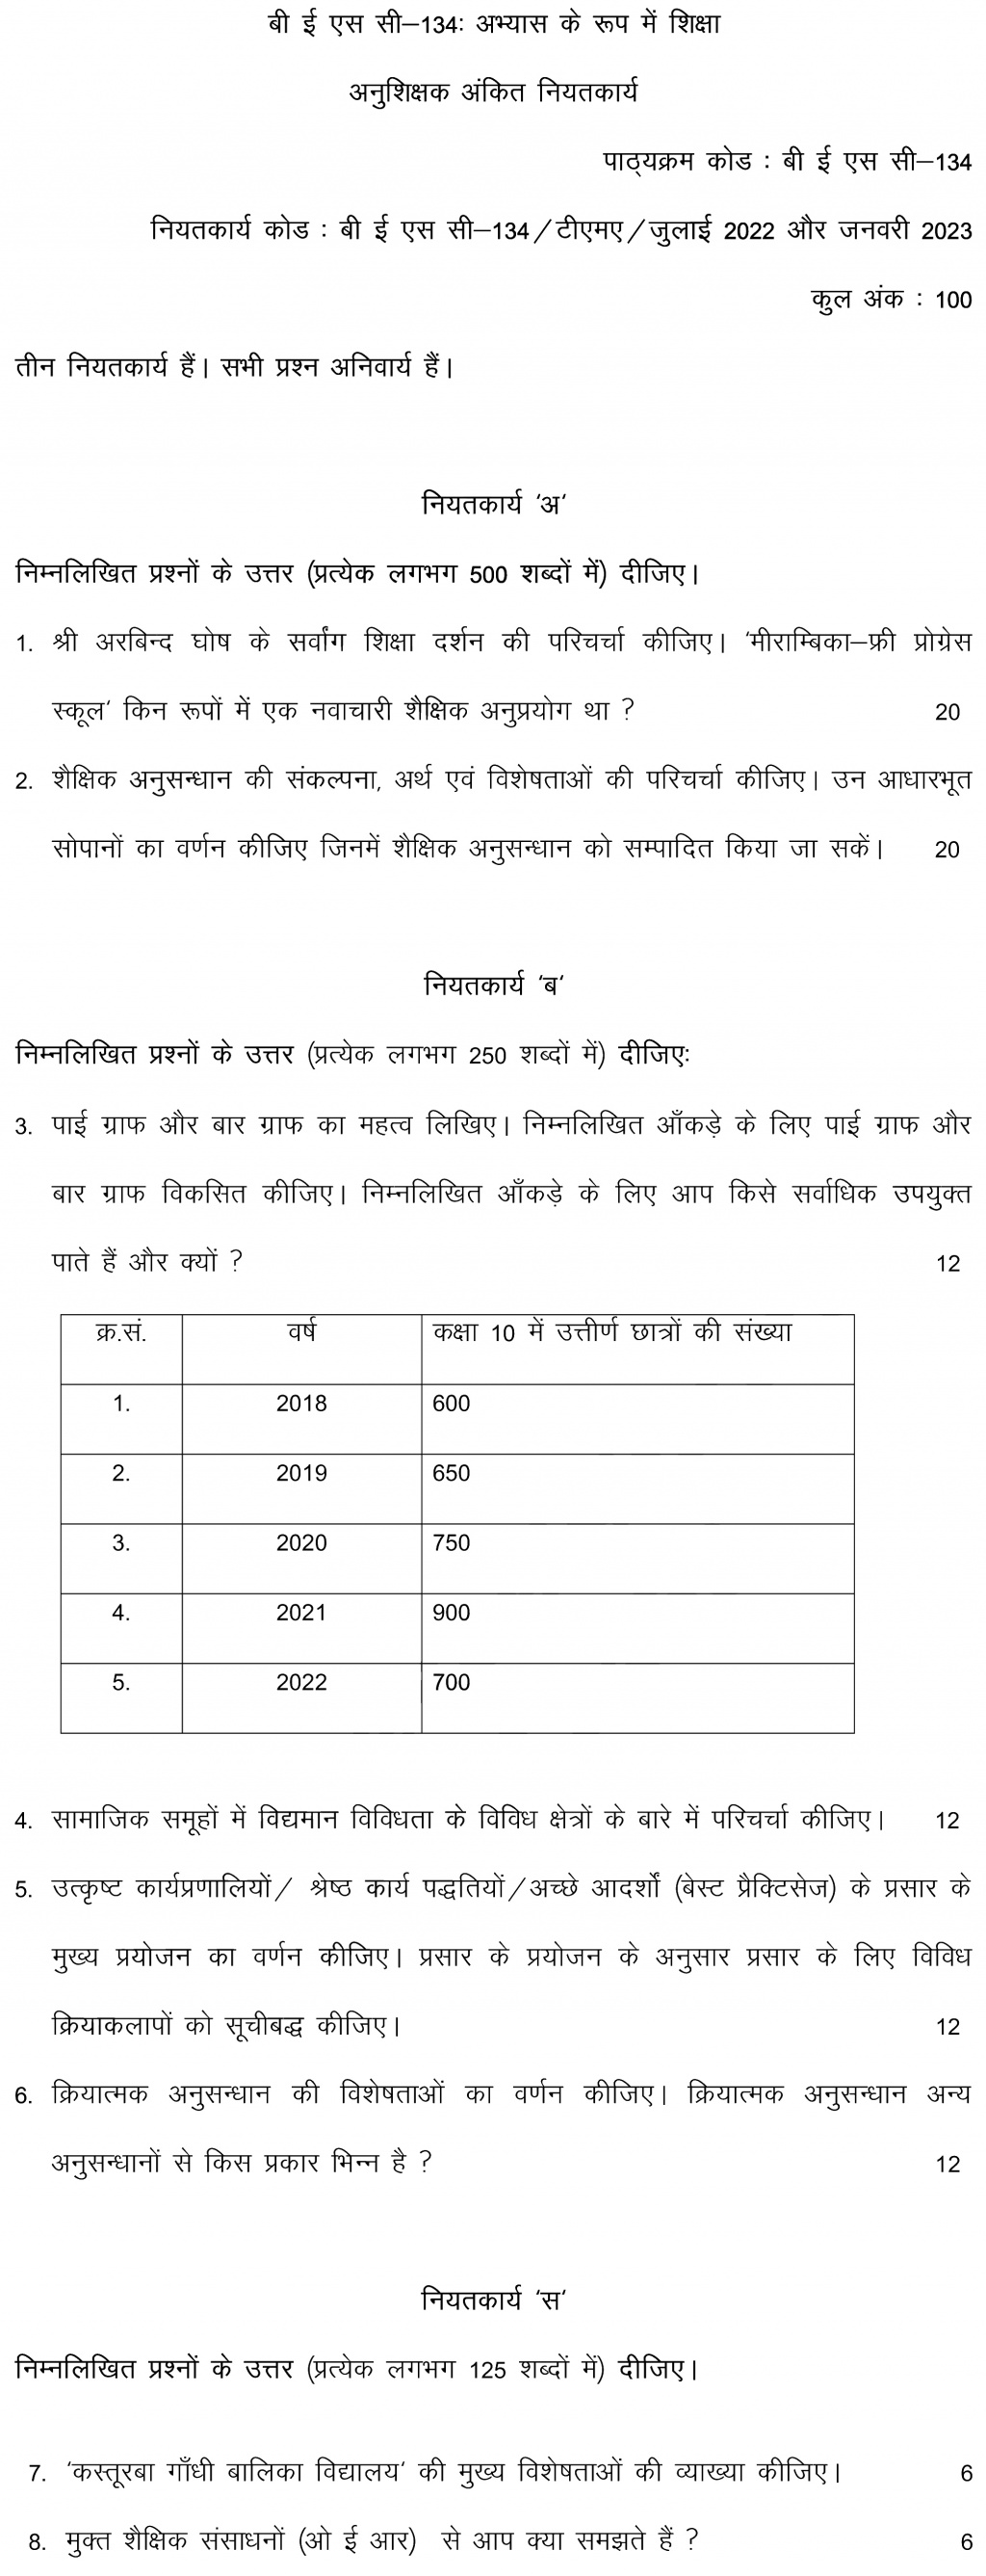 IGNOU BESC-134 - Education as a Practice, Latest Solved Assignment-July 2022 – January 2023